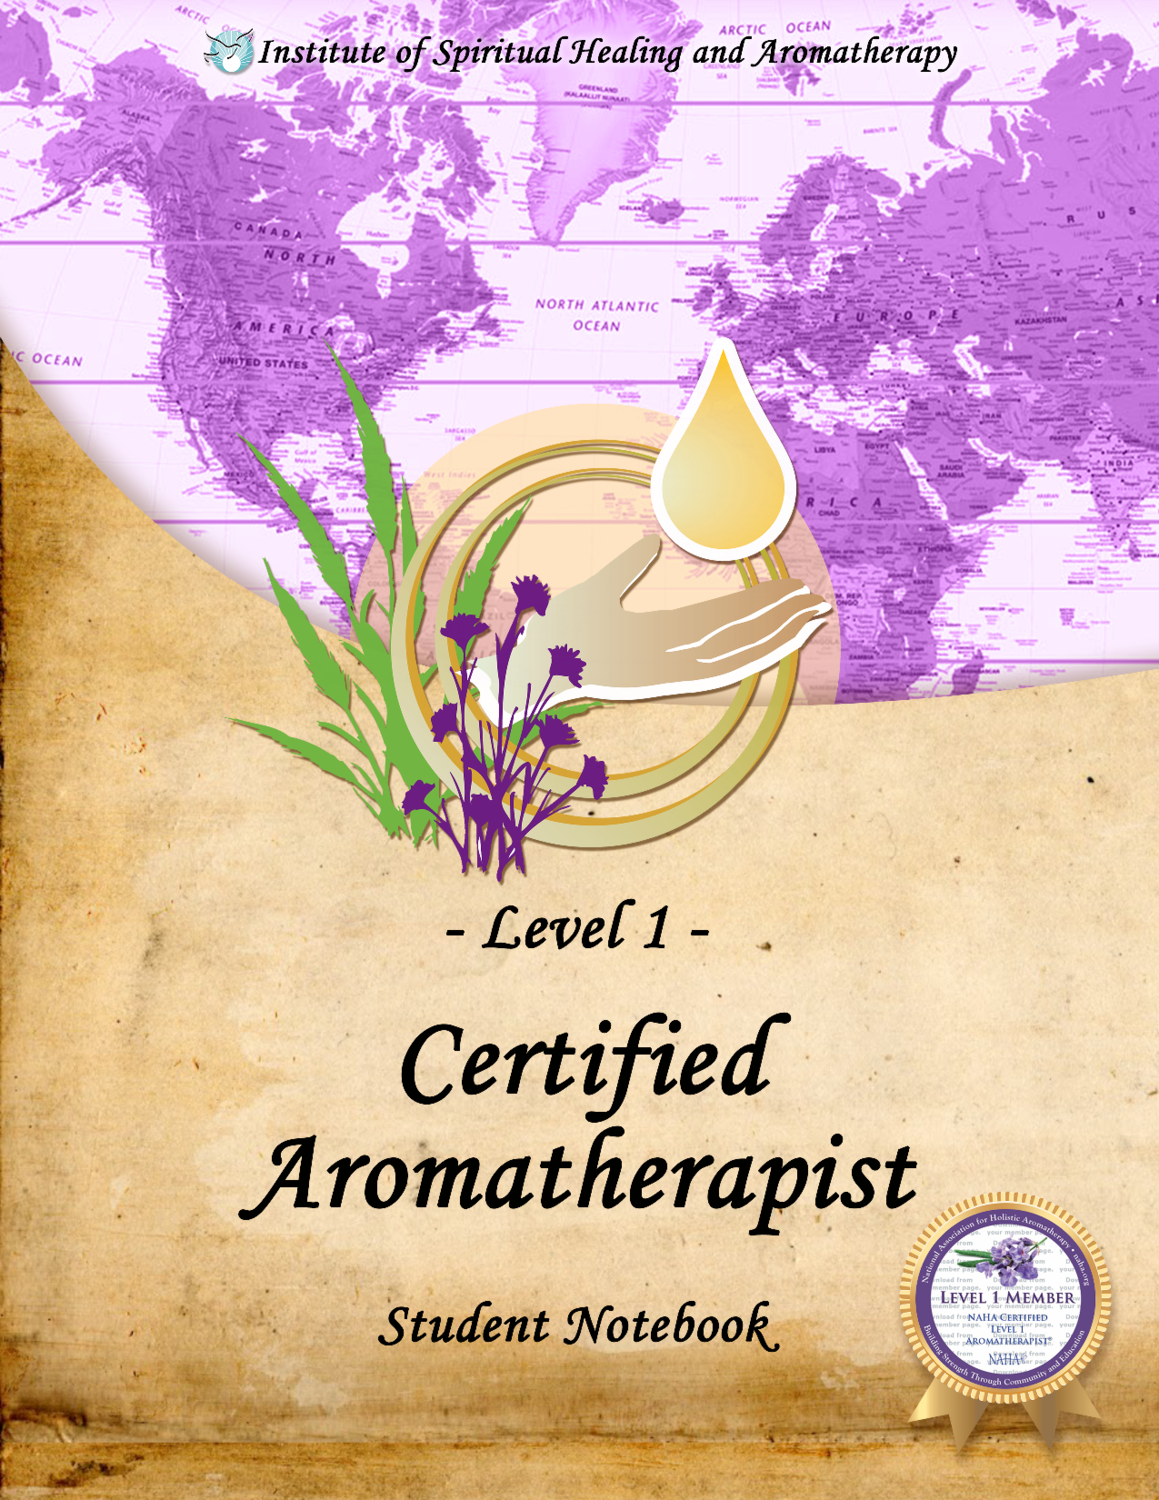 Certified Aromatherapy - Level 1 - Knoxville, TN  -September 16-18, 2022